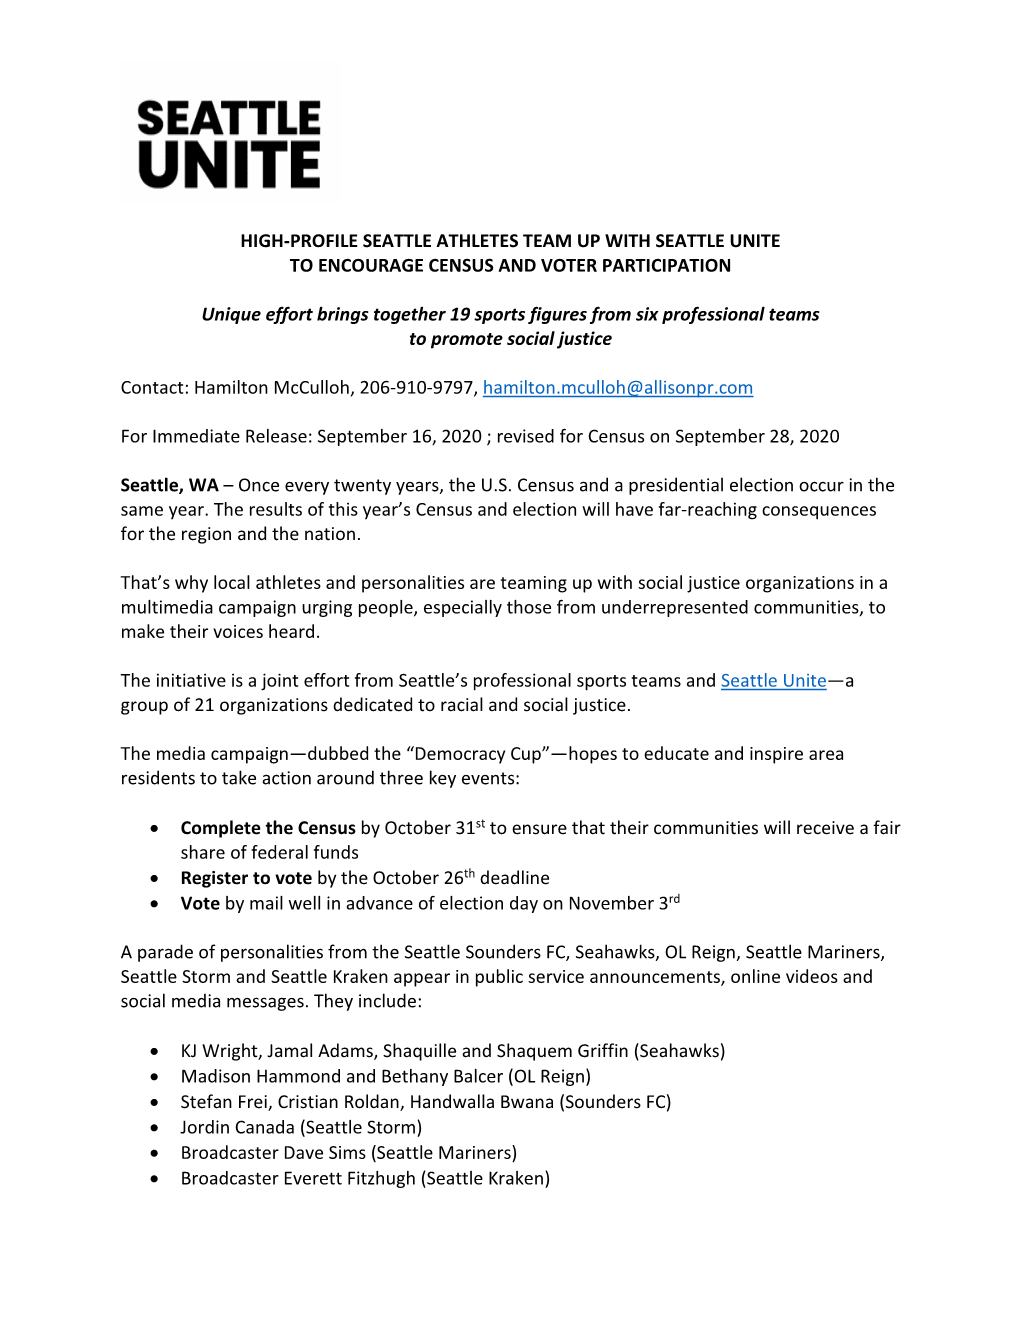 HIGH-PROFILE SEATTLE ATHLETES TEAM up with SEATTLE UNITE to ENCOURAGE CENSUS and VOTER PARTICIPATION Unique Effort Brings Toget